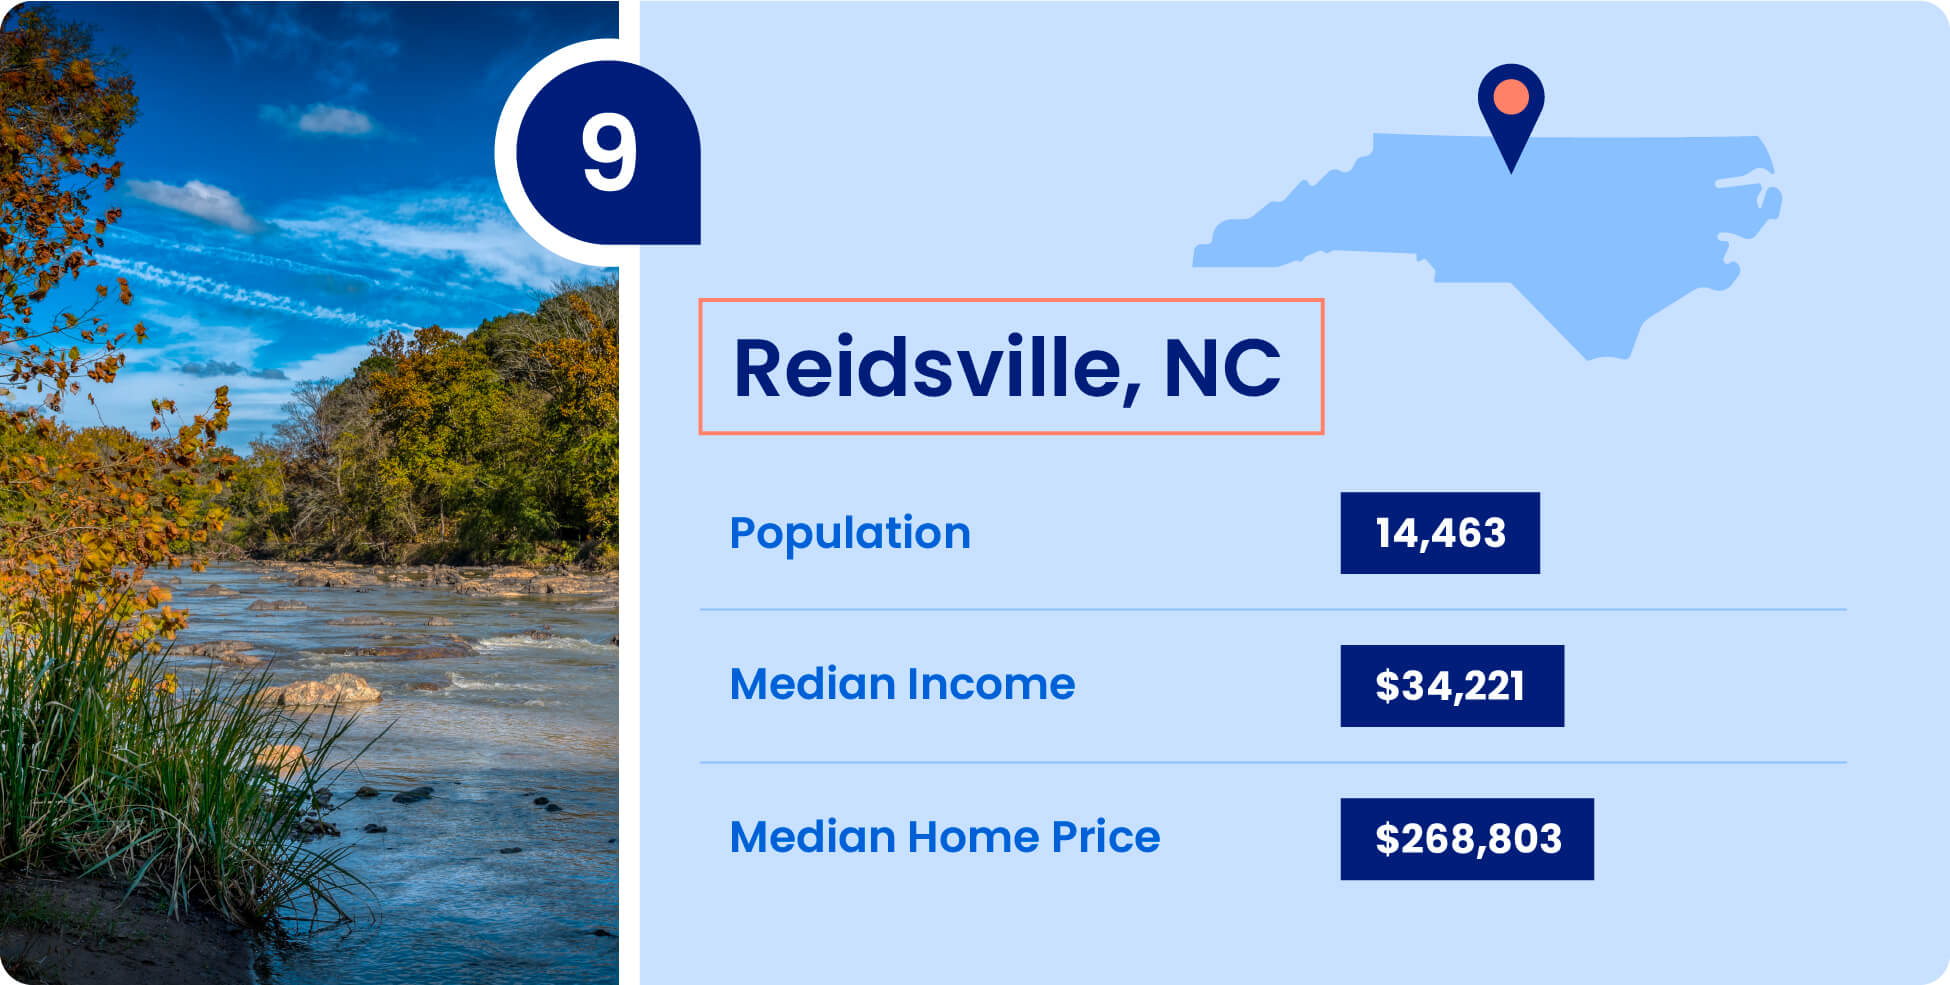 Population, median income, and median home price for Reidsville, one of the cheapest places to live in North Carolina.